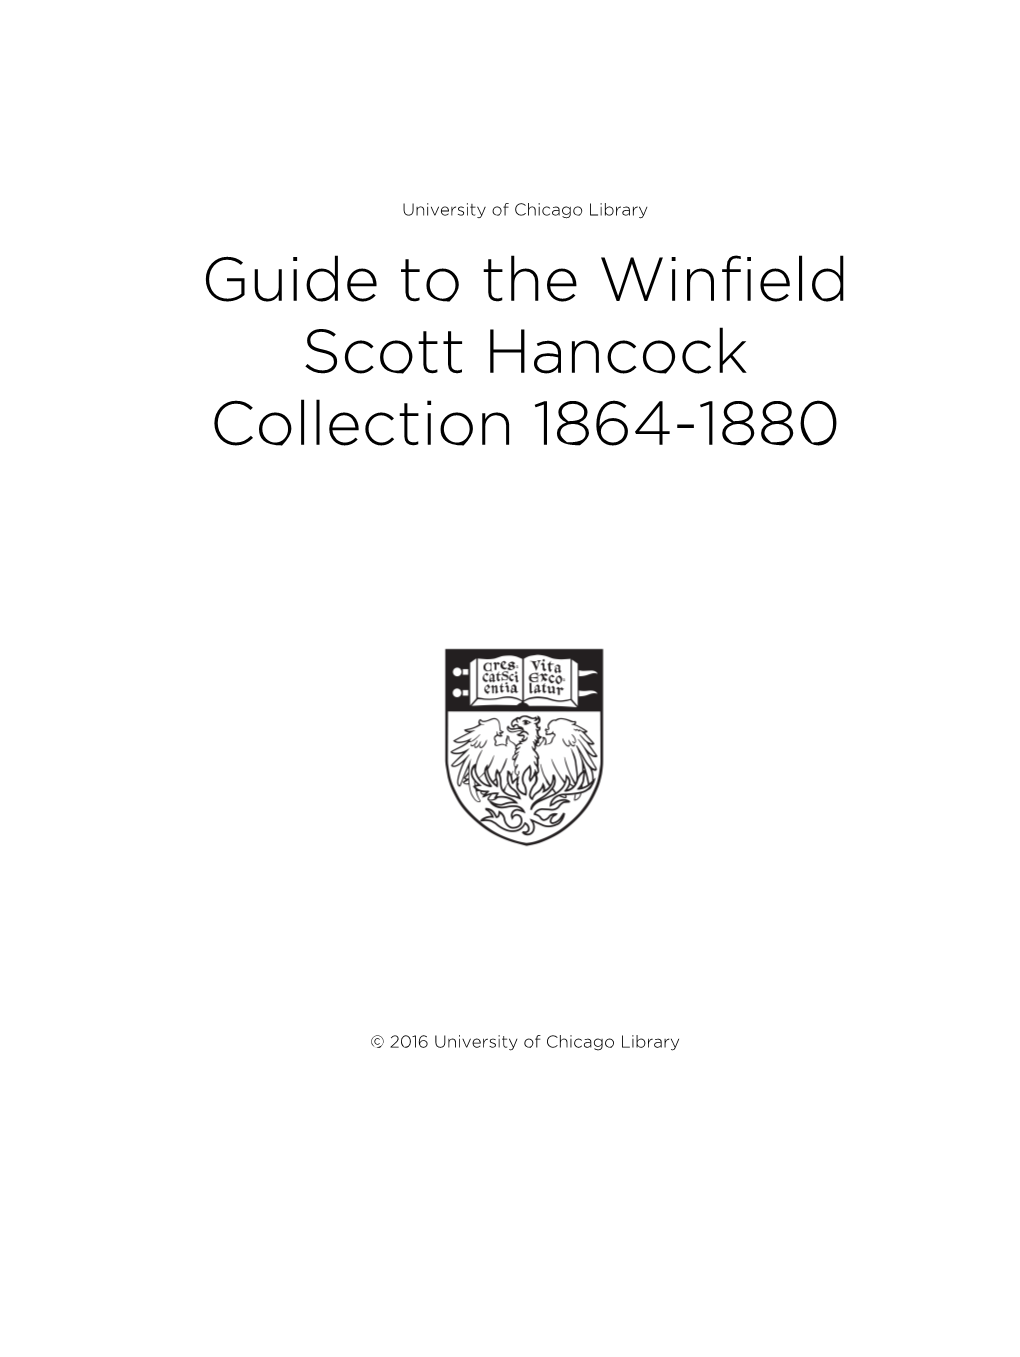 Guide to the Winfield Scott Hancock Collection 1864-1880